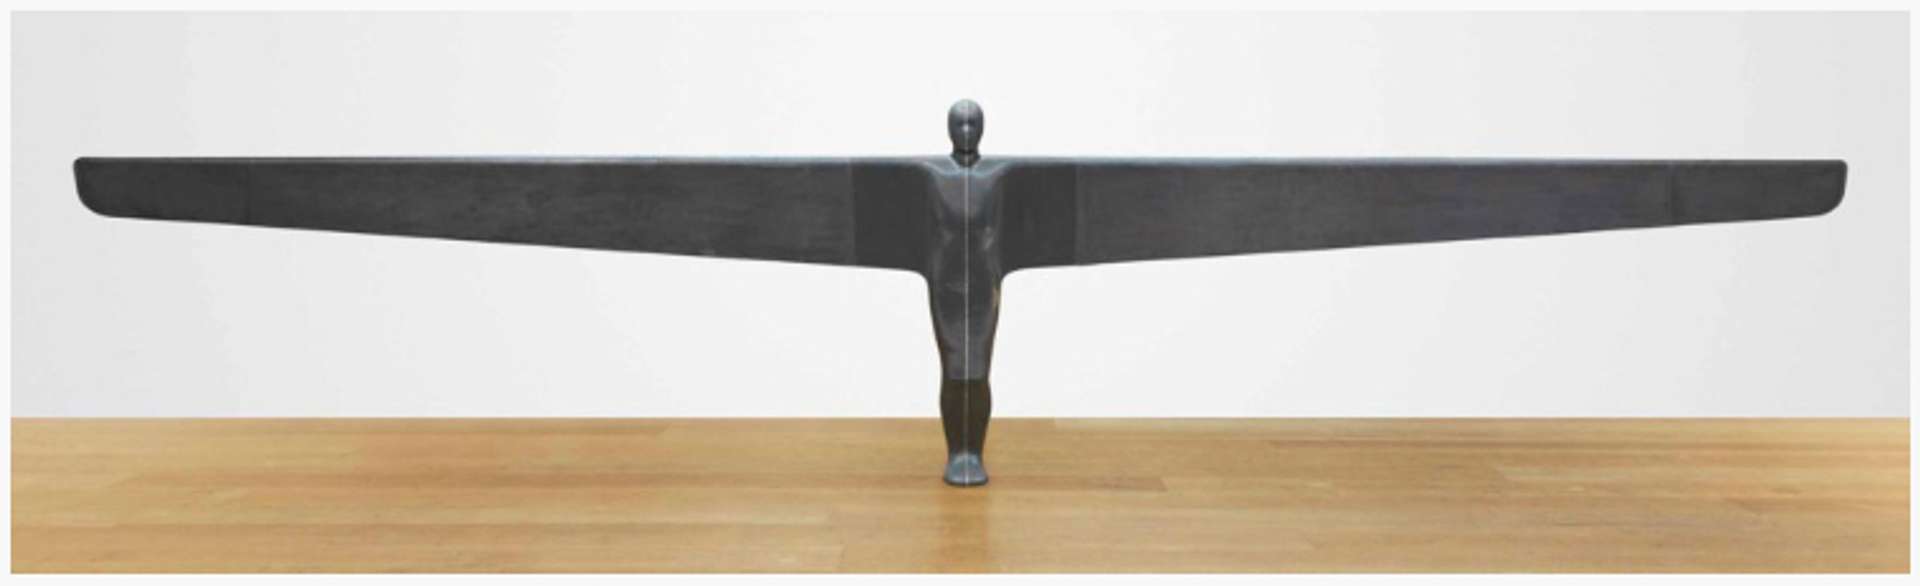 A life-sized standing sculpture of a figure flanked by an 8.5-metre wingspan. The figure has no defining features other than the human form and stands on the ground with its knees slightly bent. The sculpture is captured in a photograph within an empty gallery space, emphasising its presence and allowing viewers to appreciate its form and proportions.